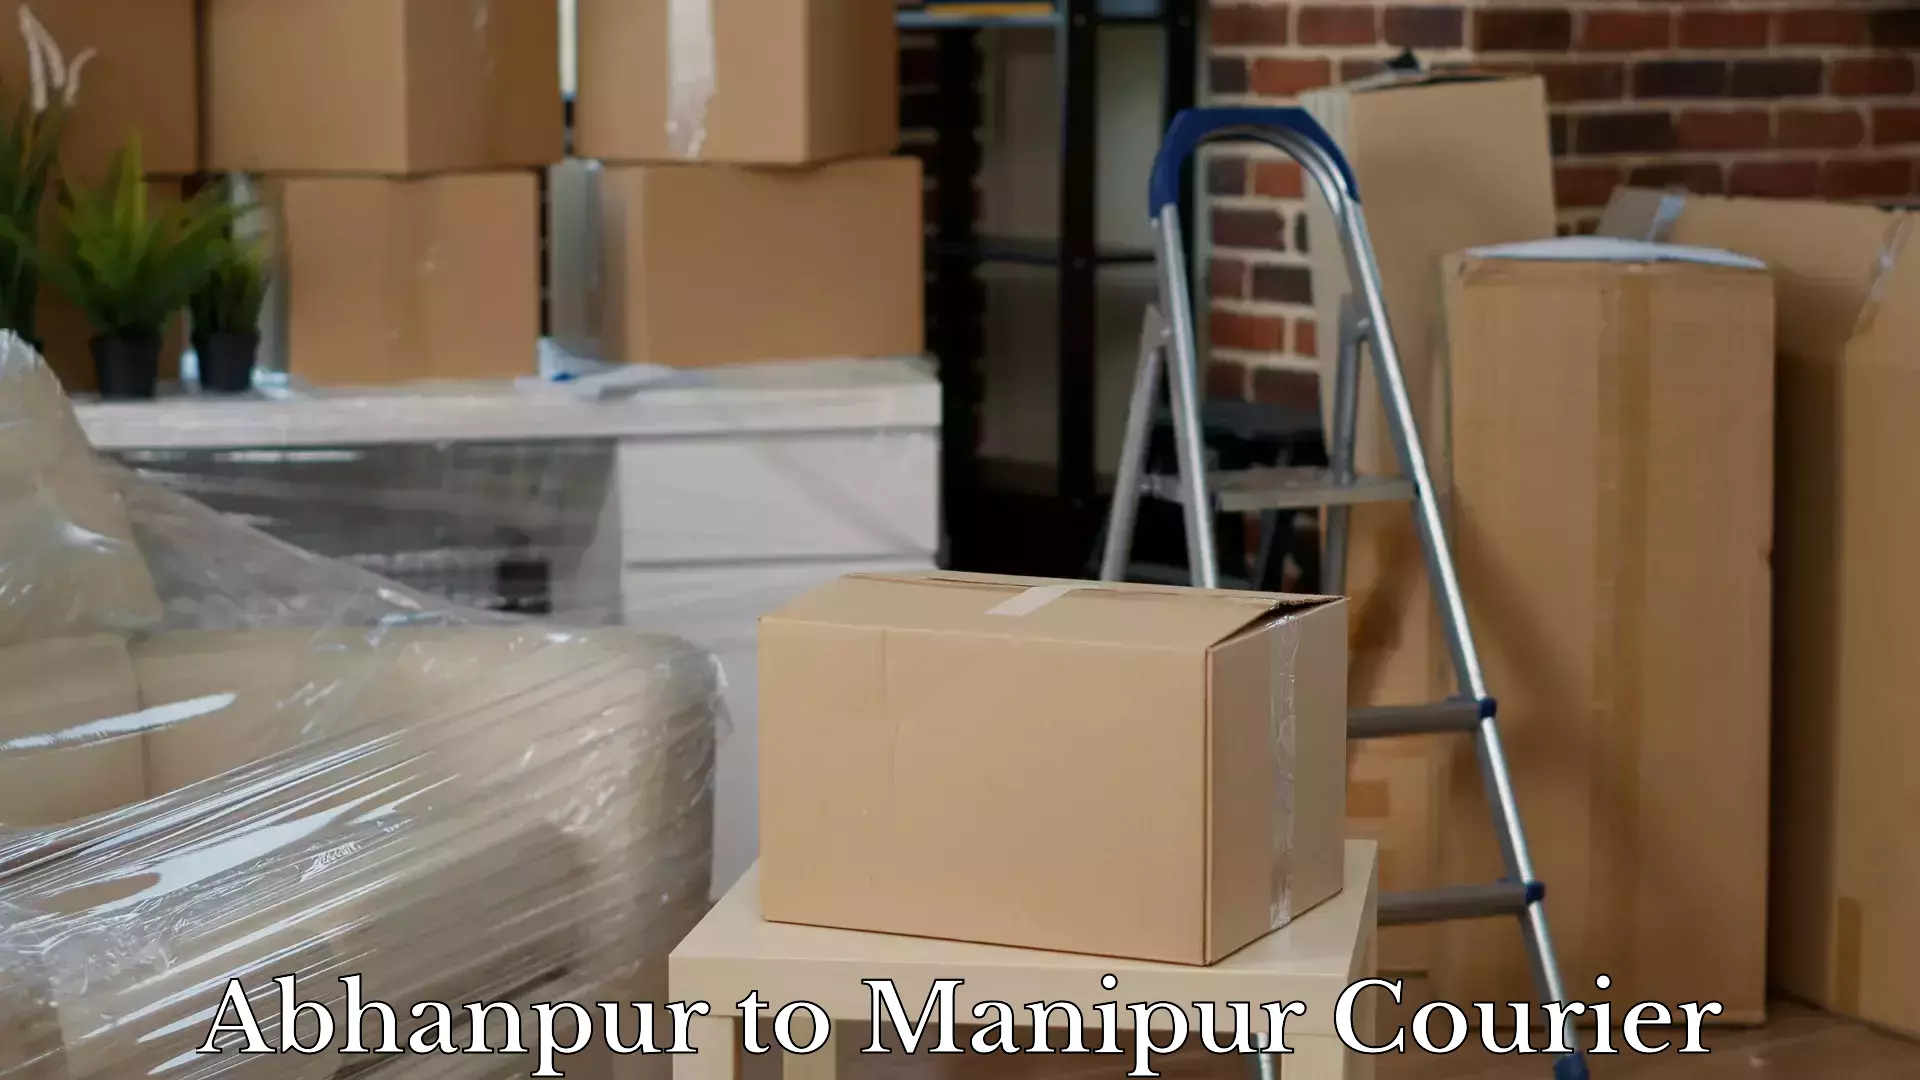 Luggage shipment specialists Abhanpur to Manipur